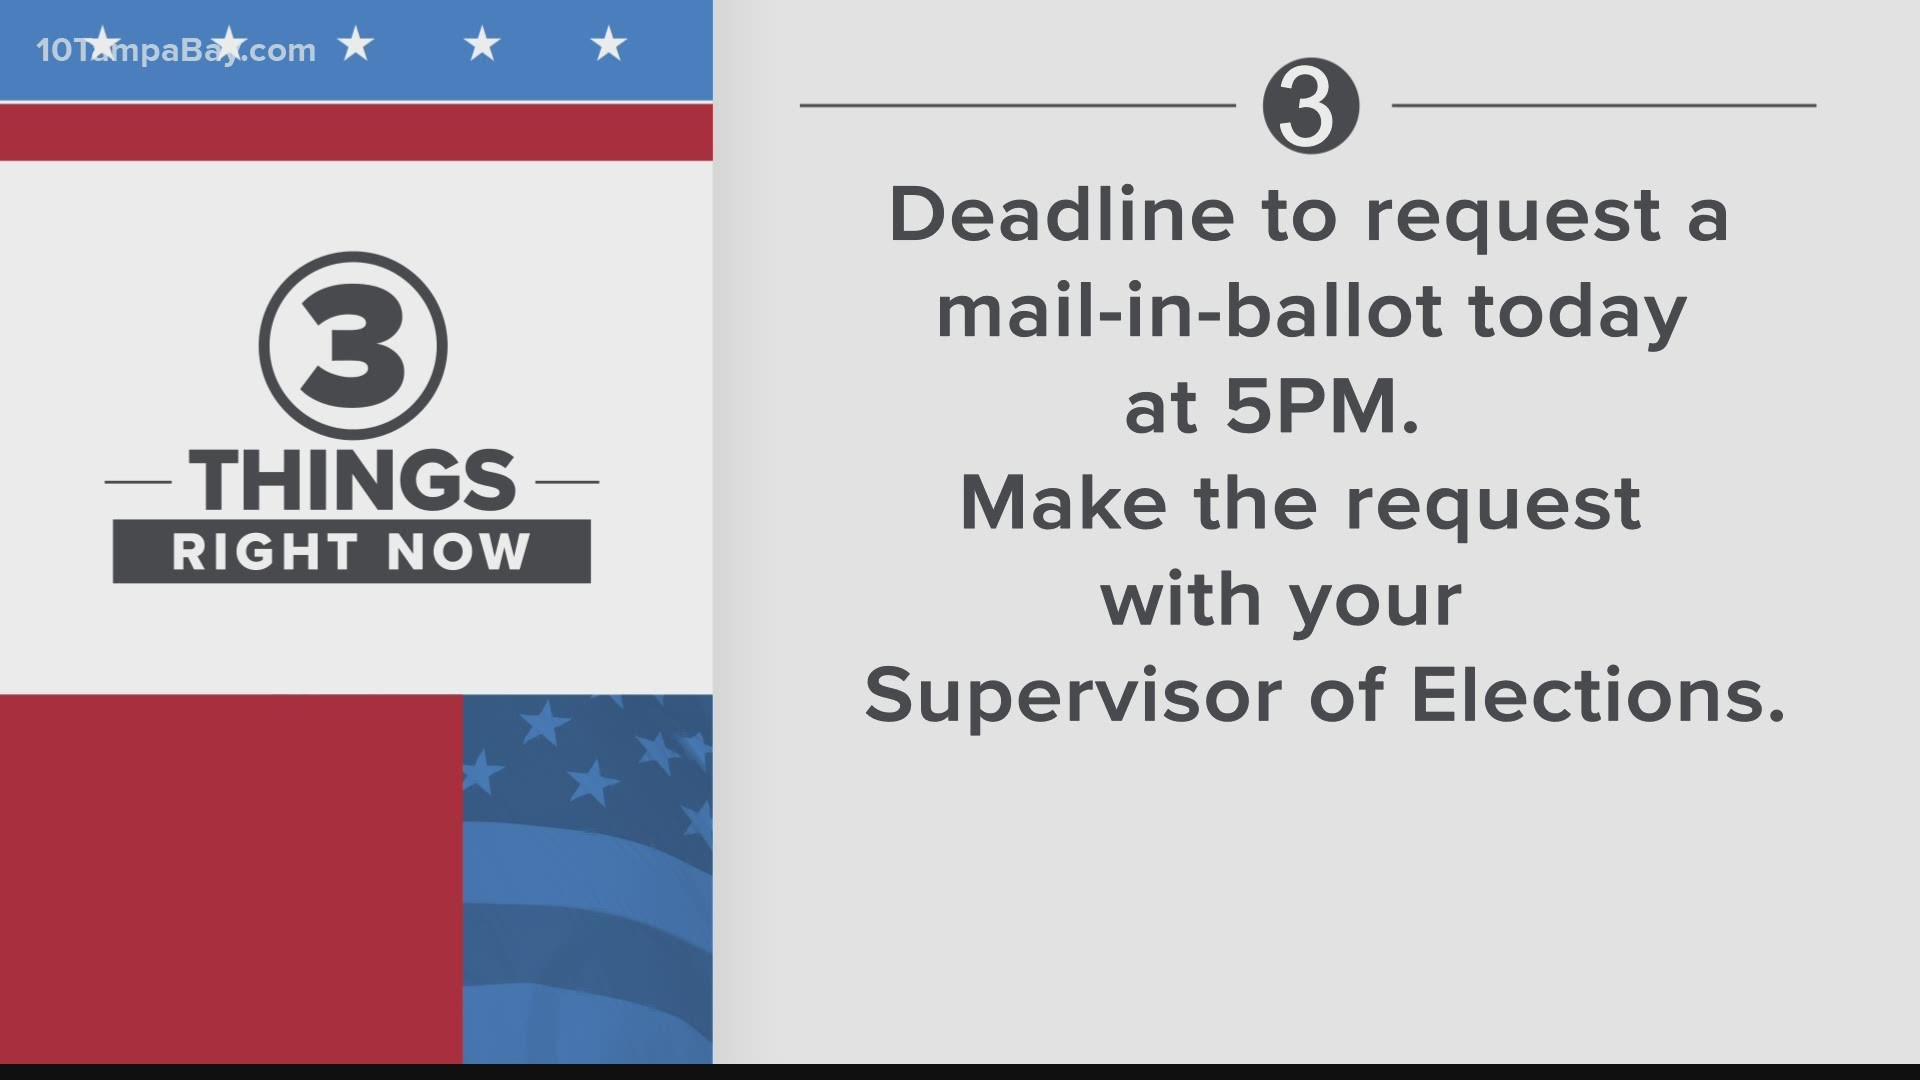 Once you have the ballot, get it in the mailbox or drop it off at your local Supervisor of Elections' office.